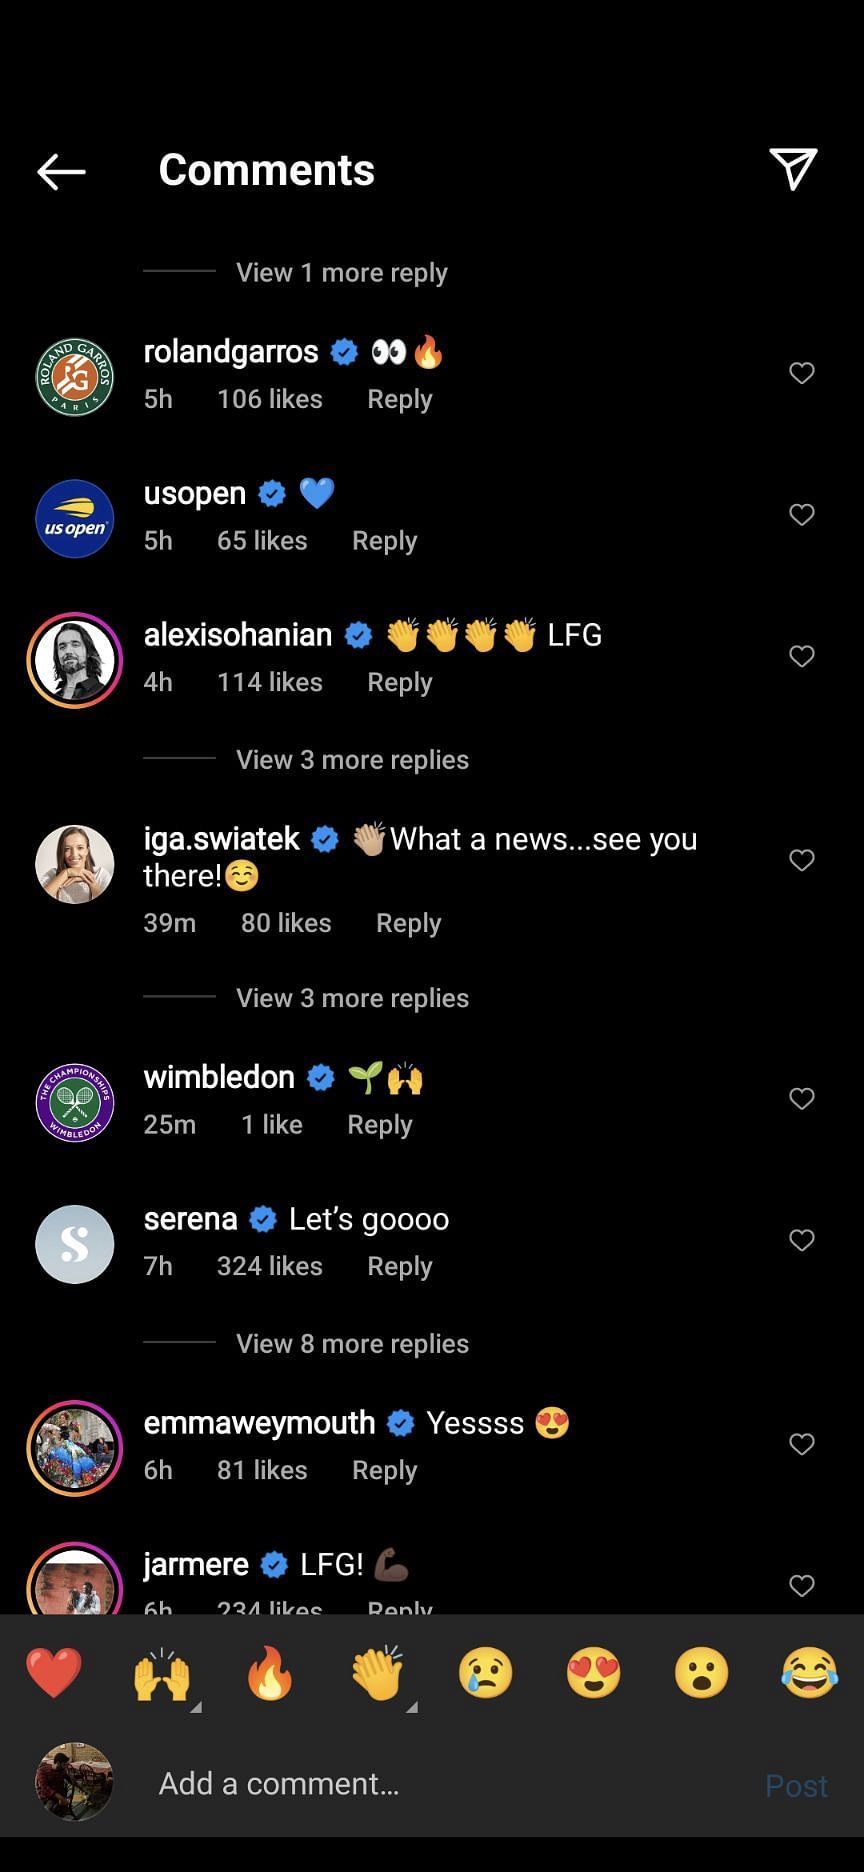 Iga Swiatek&#039;s comment on Williams&#039; post confirming her participation in Wimbledon